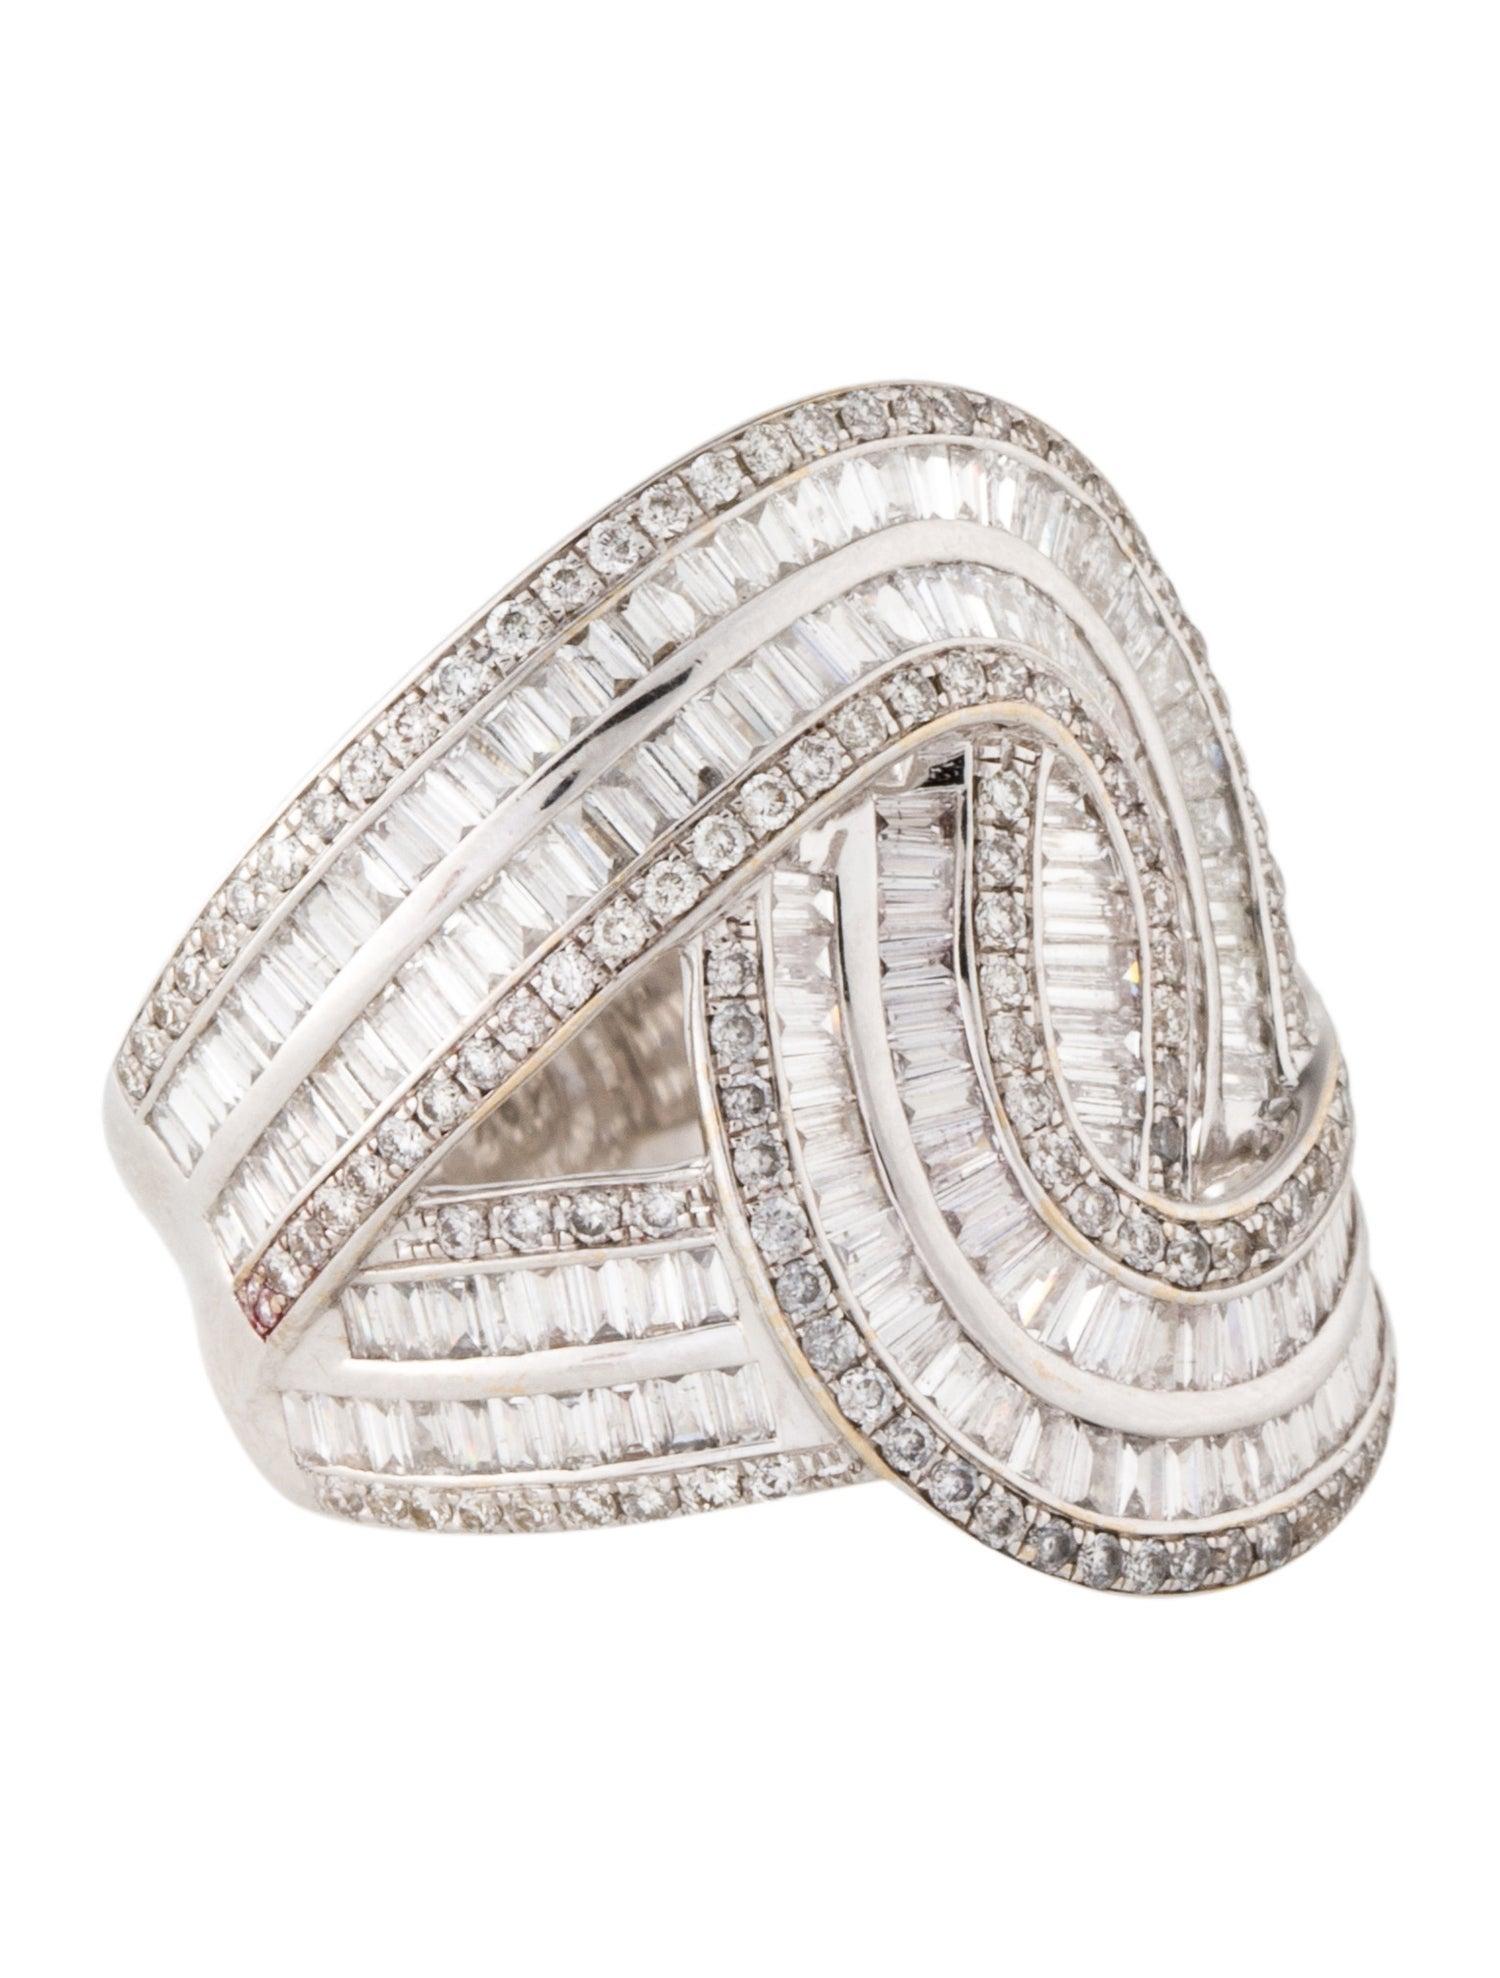 Elevate your jewelry collection with our magnificent Rhodium-Plated 18K White Gold Diamond Cocktail Ring. This striking piece, sized at 6.25, is a showcase of brilliance and luxury, featuring a total diamond weight of 2.46 carats. The ring combines